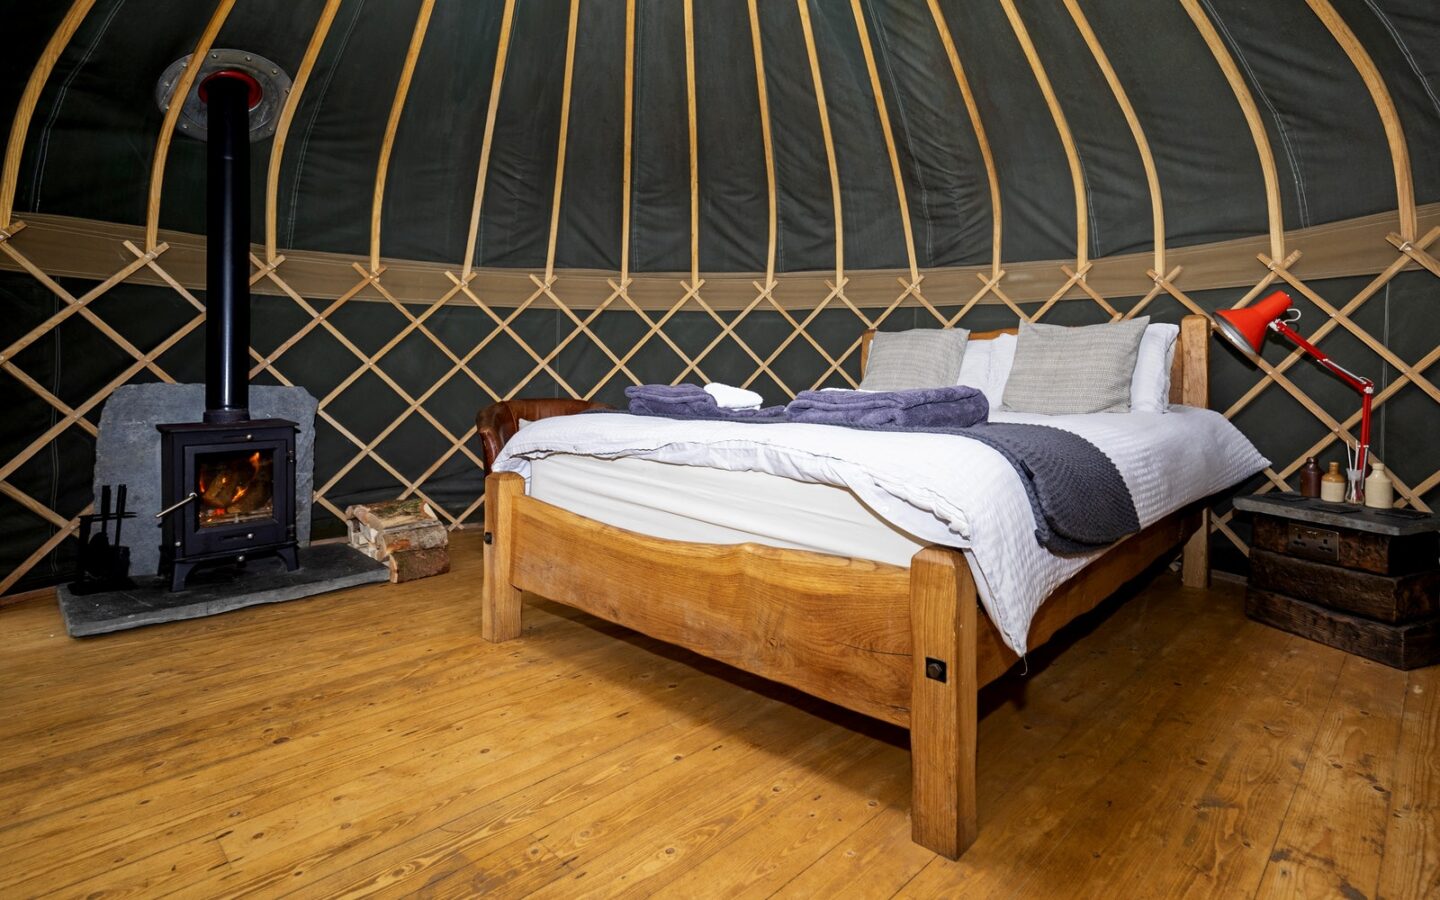 Glamping in Wales with hot tub, The Yurt Hideaway inside